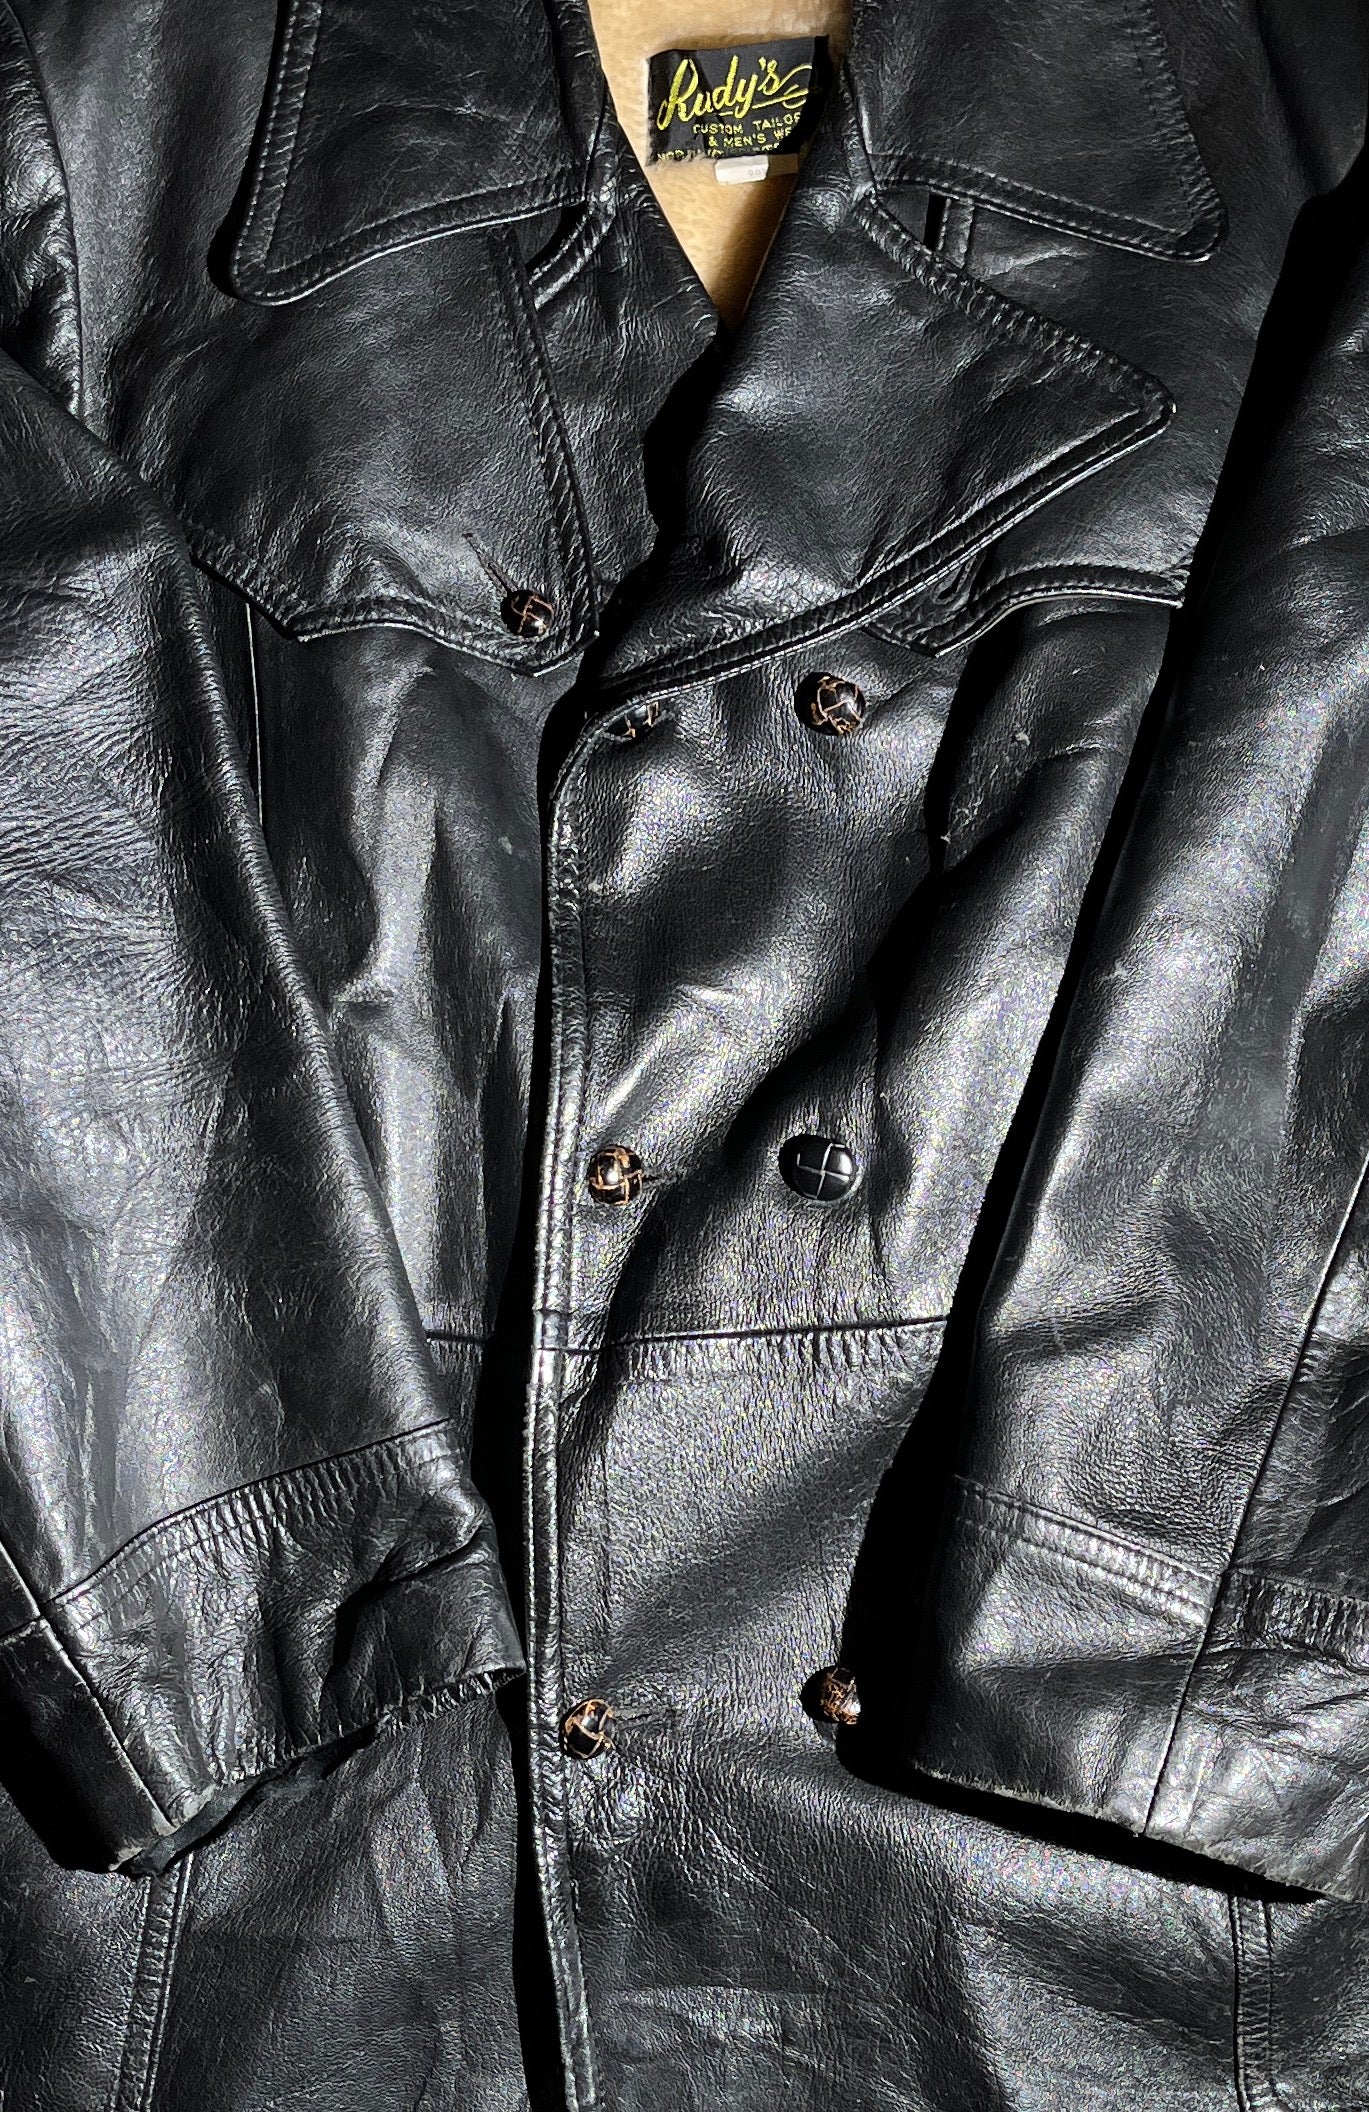 Vintage Rudy's Leather Jacket 1970's